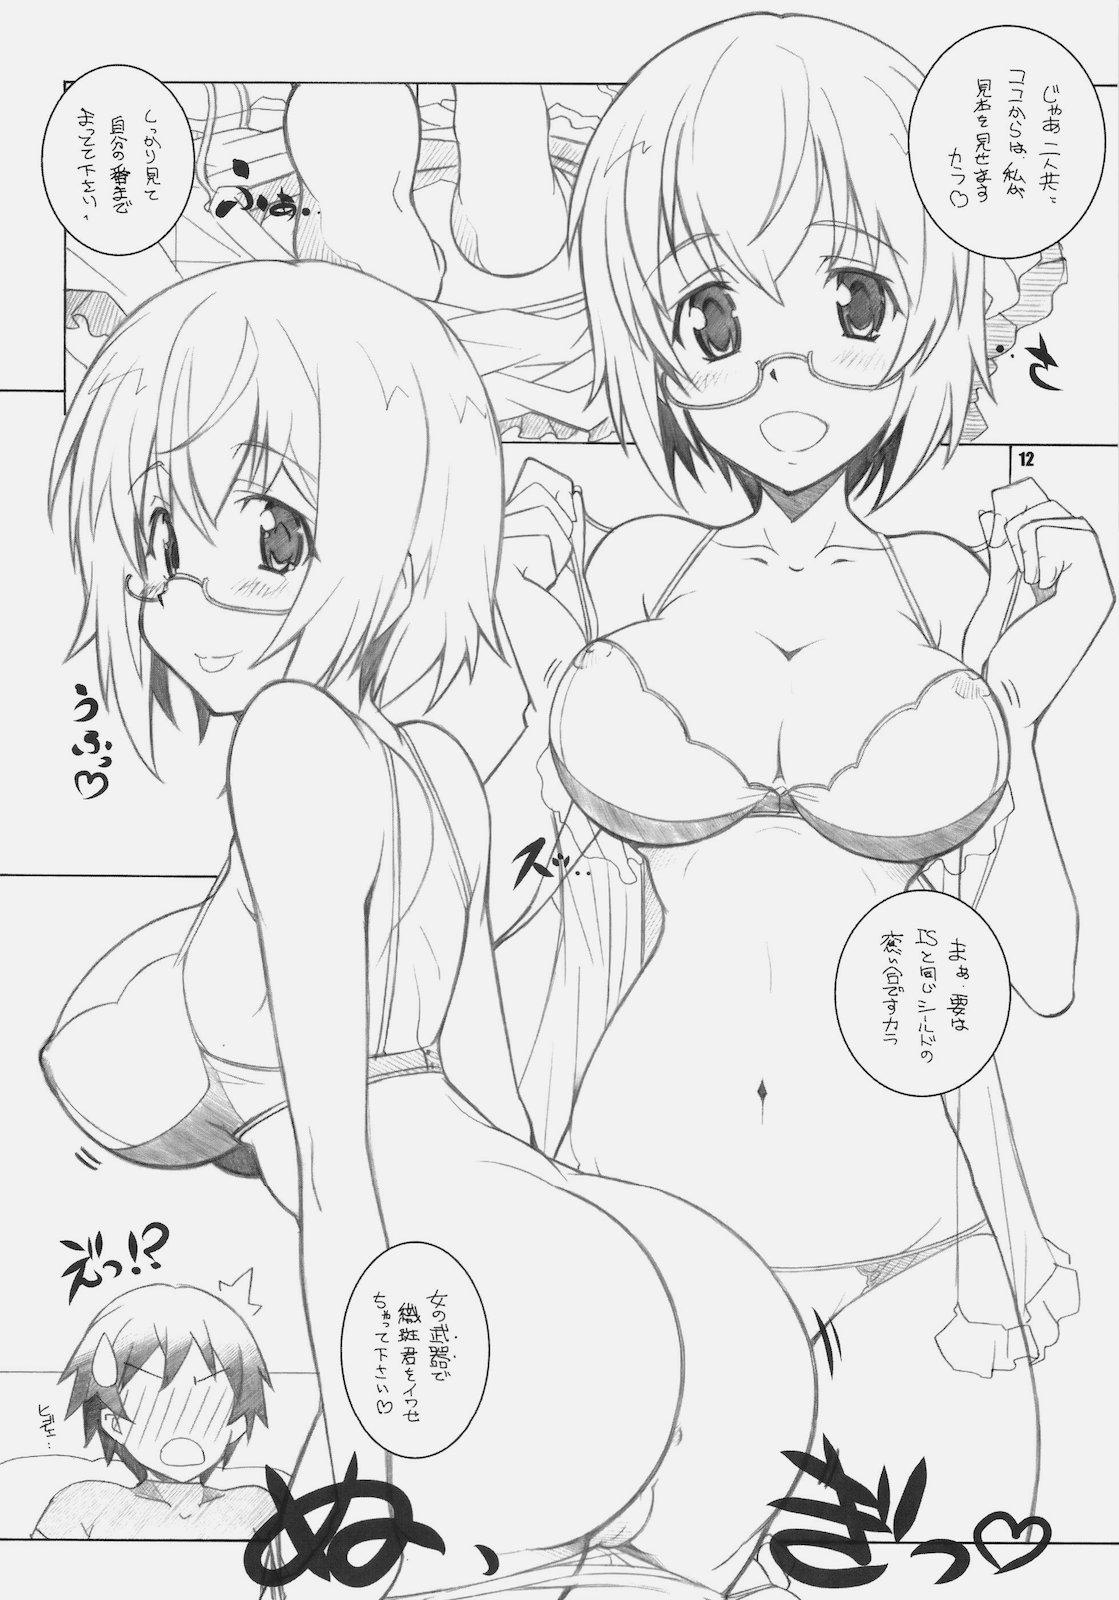 Bald Pussy SEA IS - Infinite stratos Hardcorend - Page 11